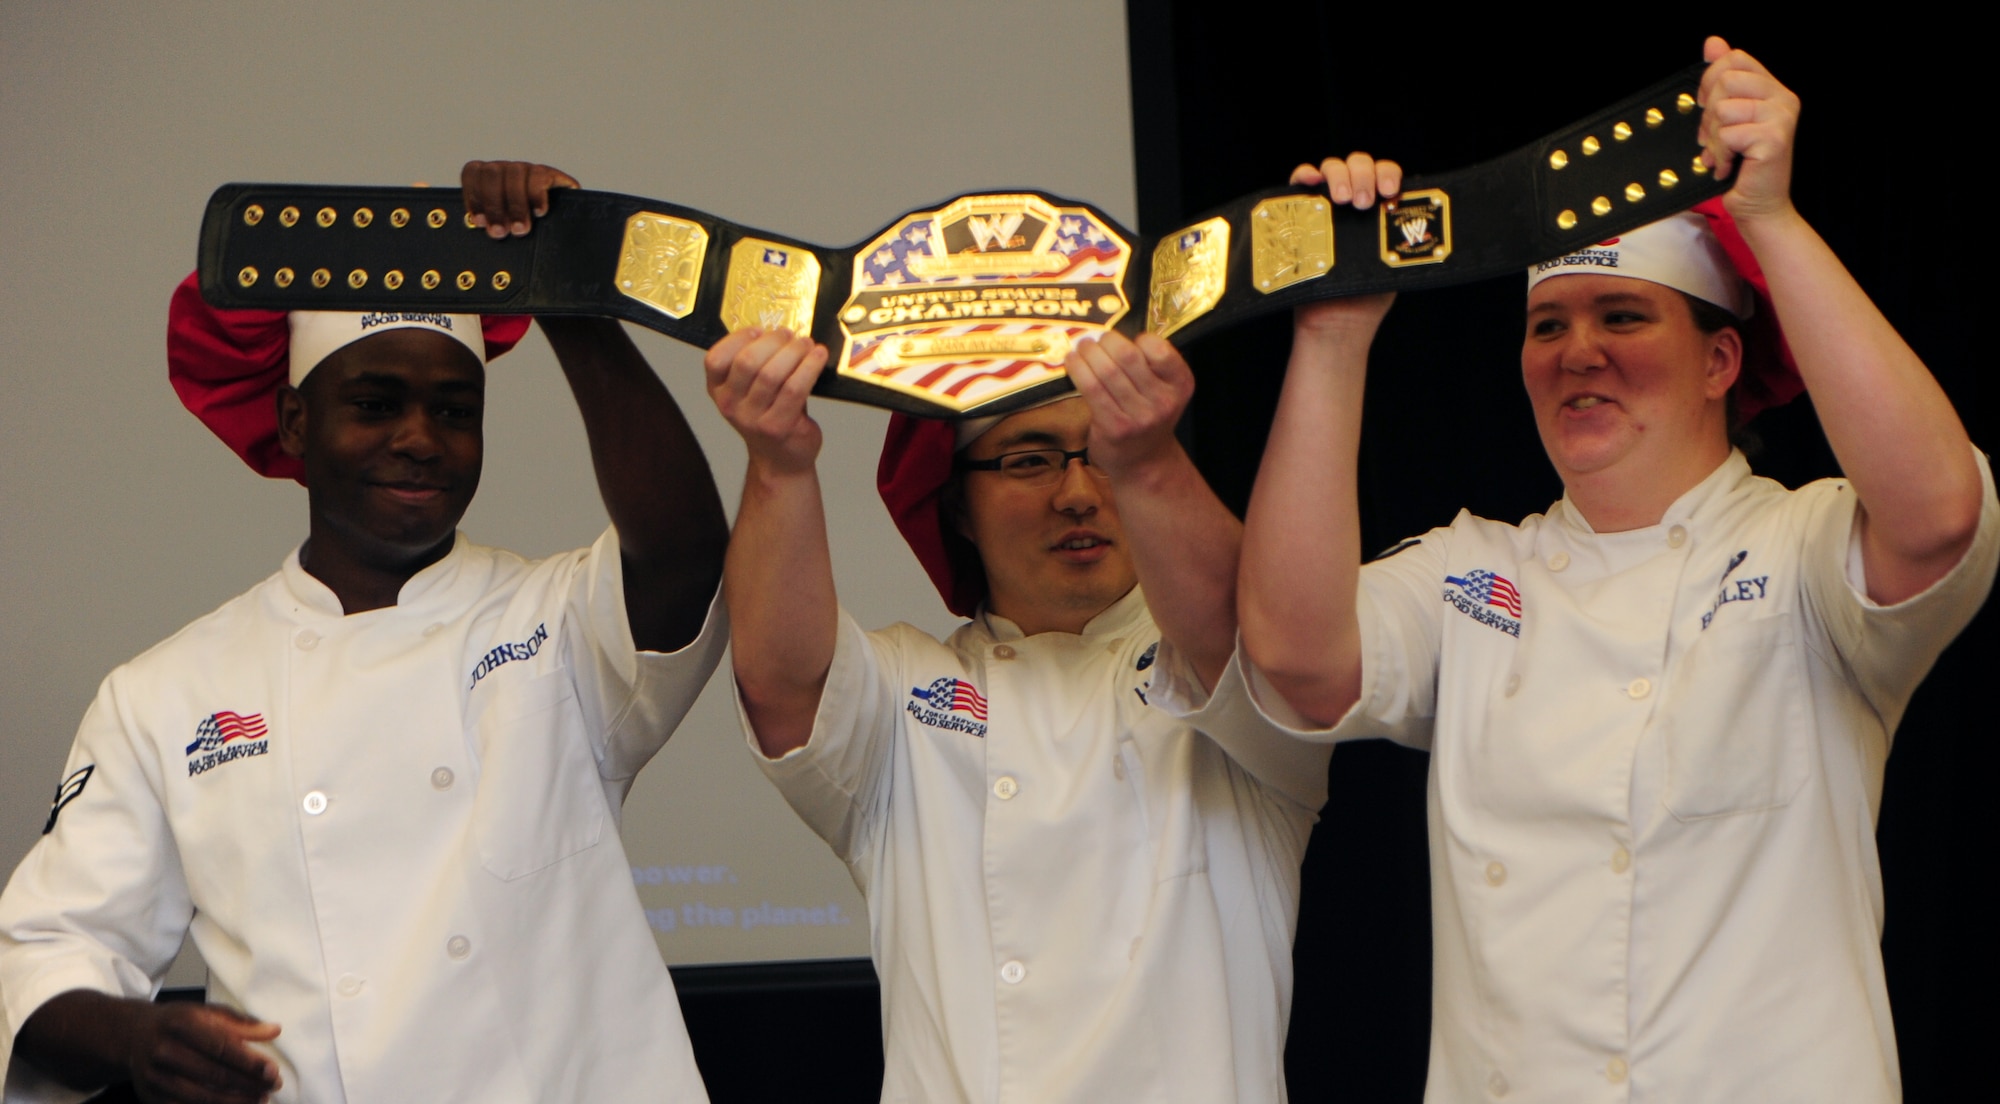 U.S. Air Force Airman 1st Class Demarcus Johnson (left), Senior Airman Rafael Hirao (center) and Staff Sgt. Jessica Bailey (right), from the 509th Force Support Squadron, hold Whiteman’s Global Strike Iron Chef Challenge championship belt at Whiteman Air Force Base, Mo., Sept. 4, 2015. The red team won the competition and will compete at the major command level at Barksdale AFB, La. (U.S. Air Force photo by Airman 1st Class Jovan Banks/Released)

